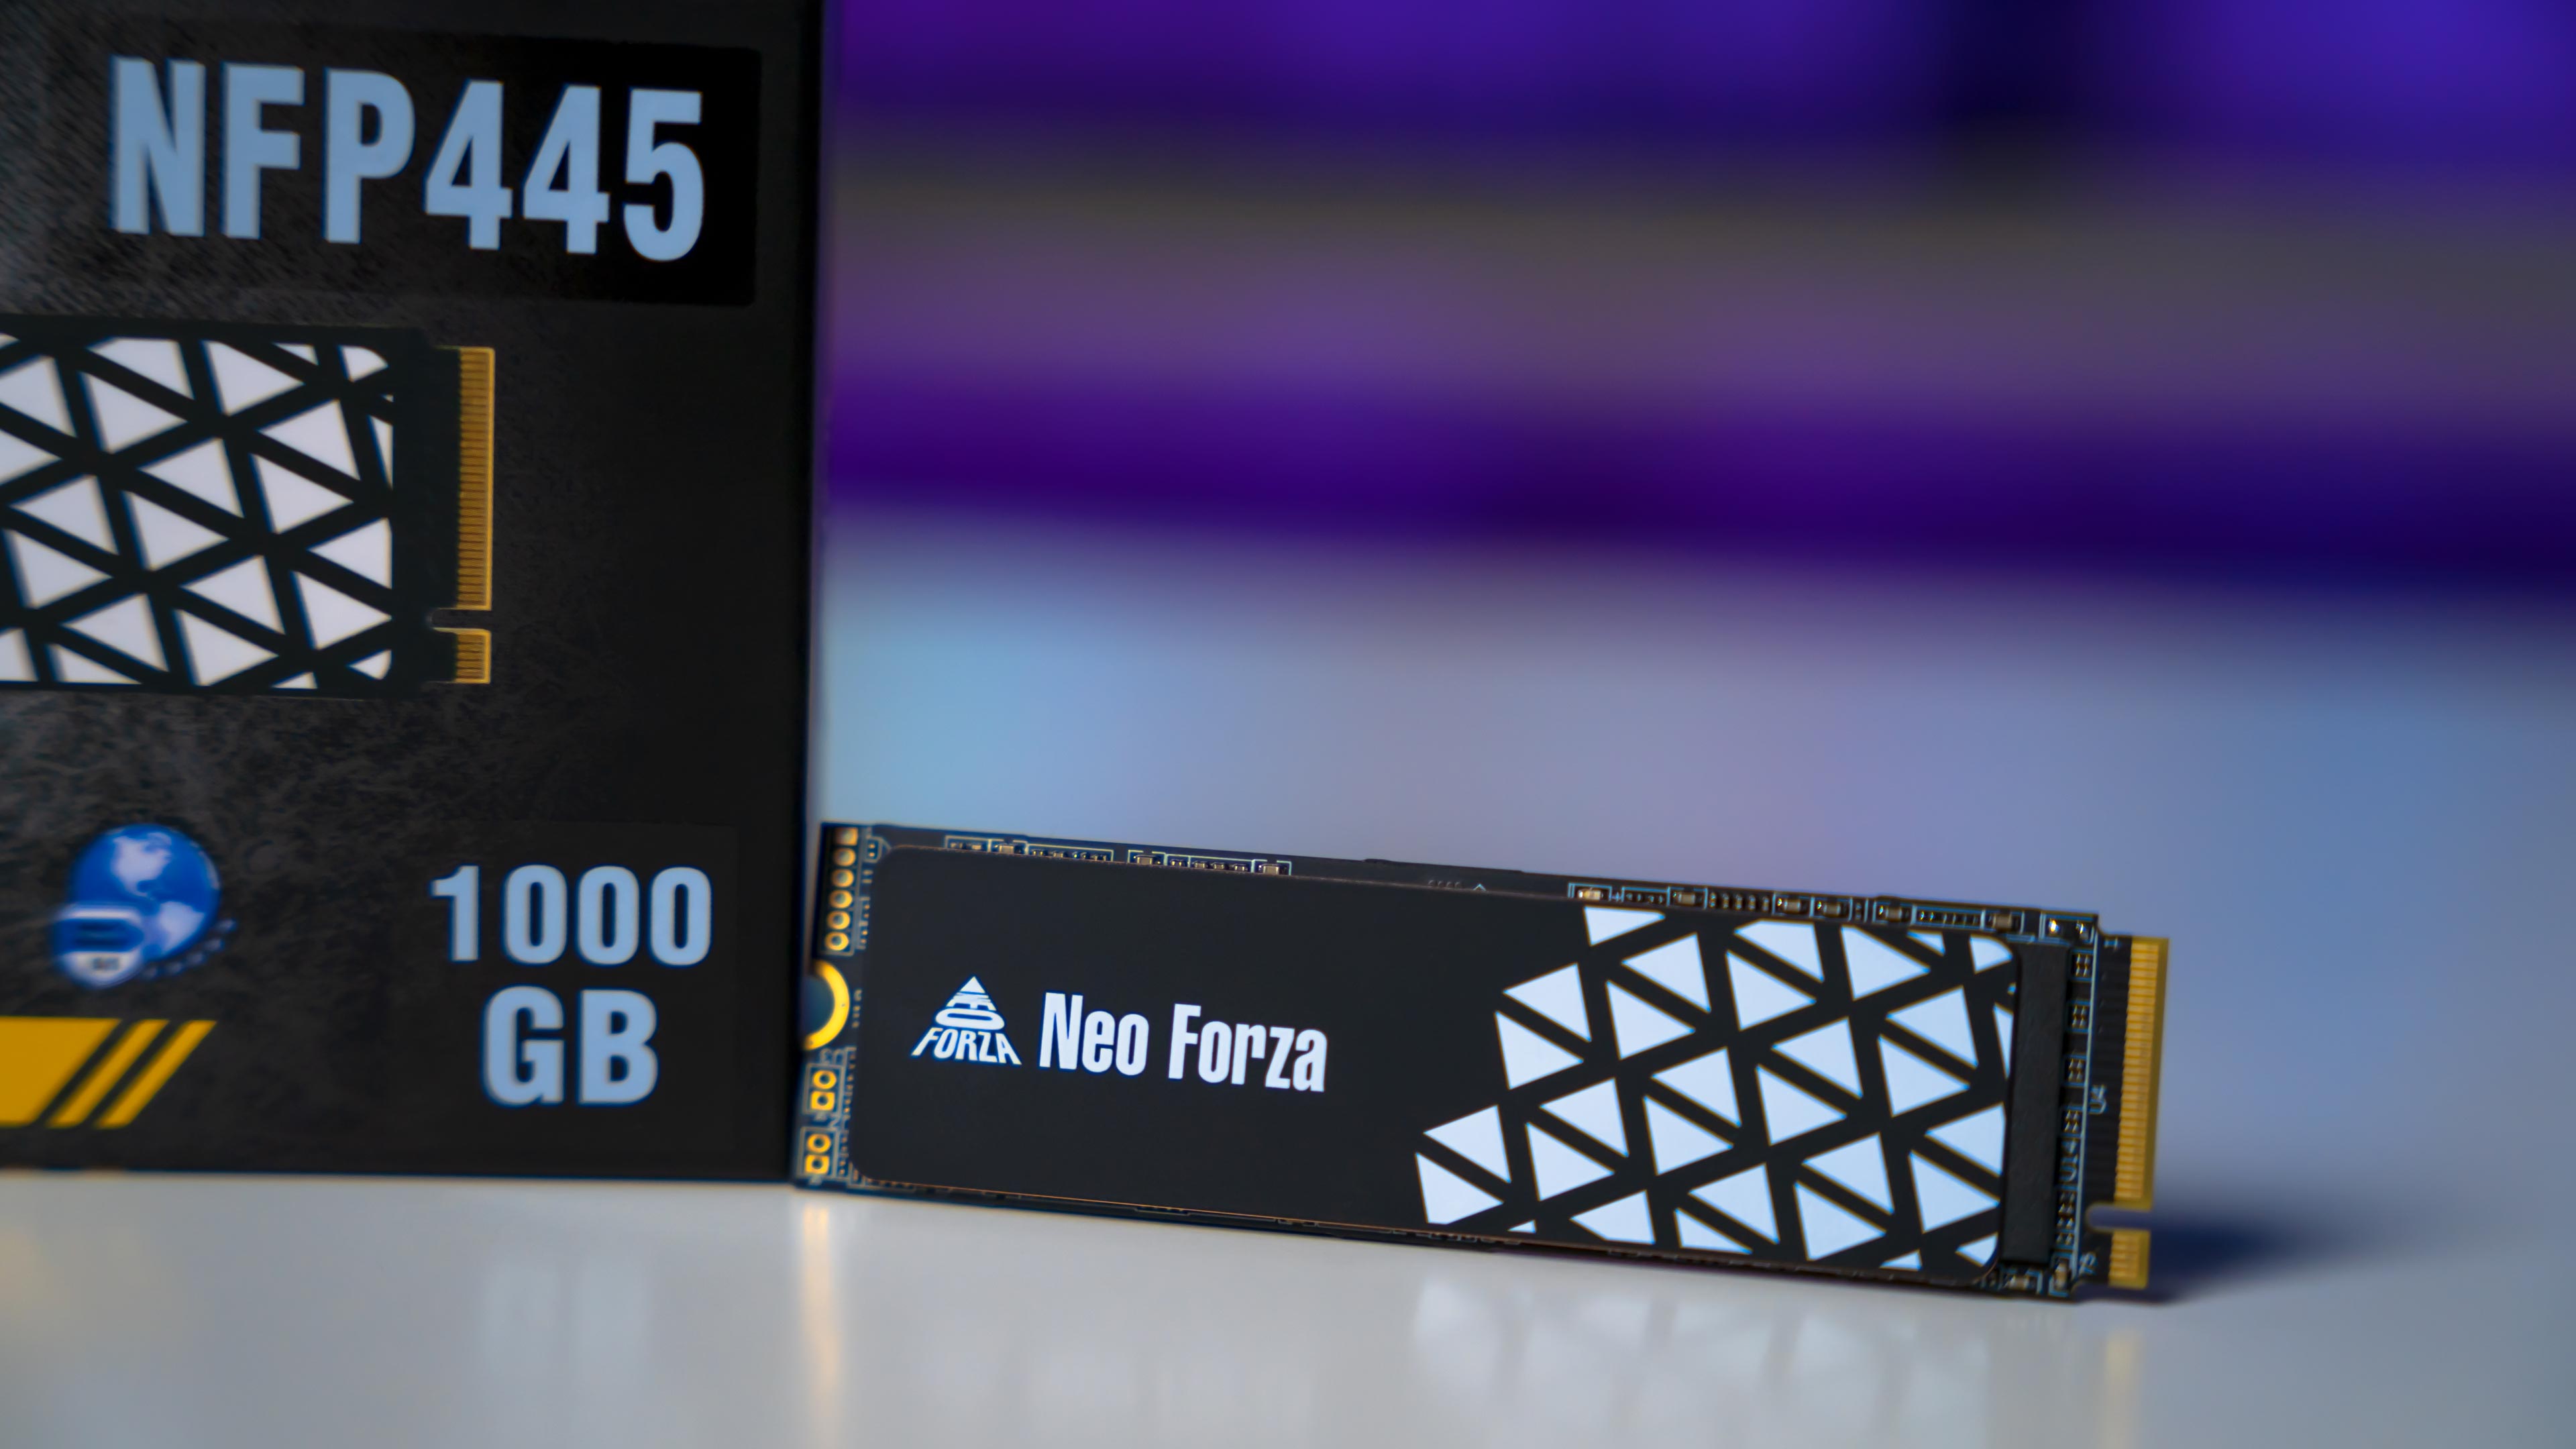 Neo Forza NFP445 1TB Gen4 M.2